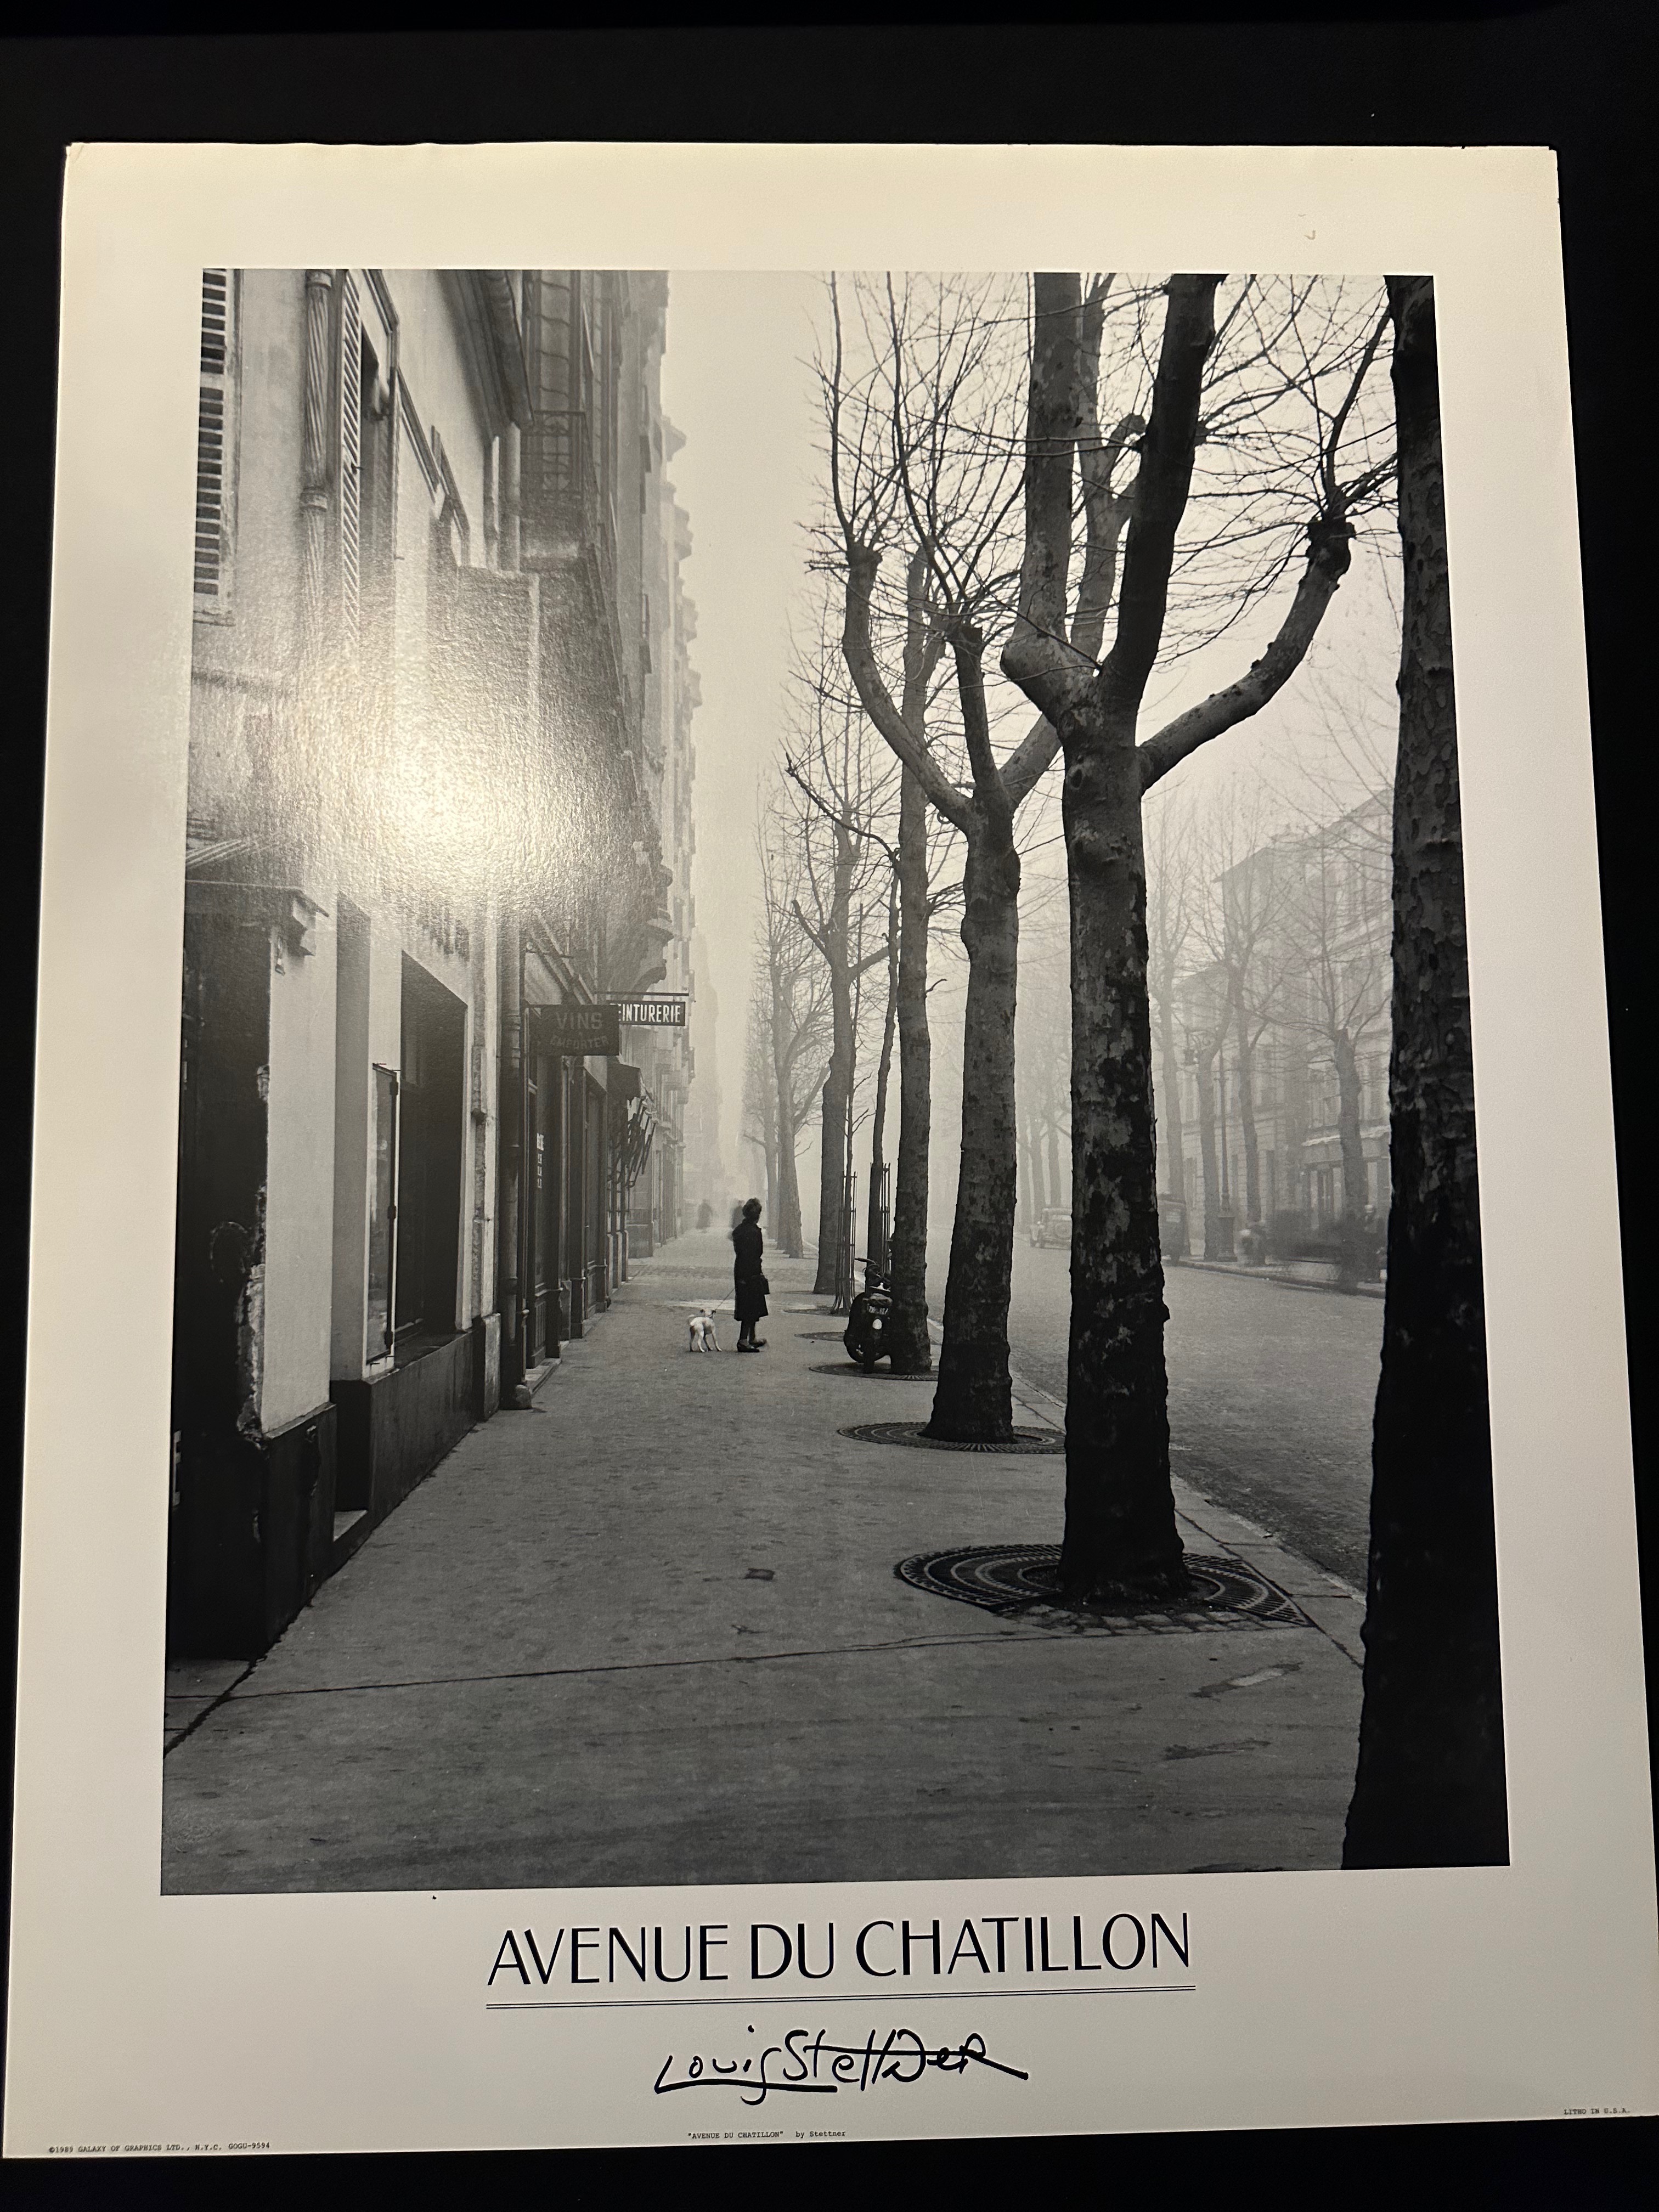 Four x Avenue Du Chatillon By Louis Stettner, 1989 Galaxy of Graphics Ltd, Litho U.S.A. - Image 5 of 16